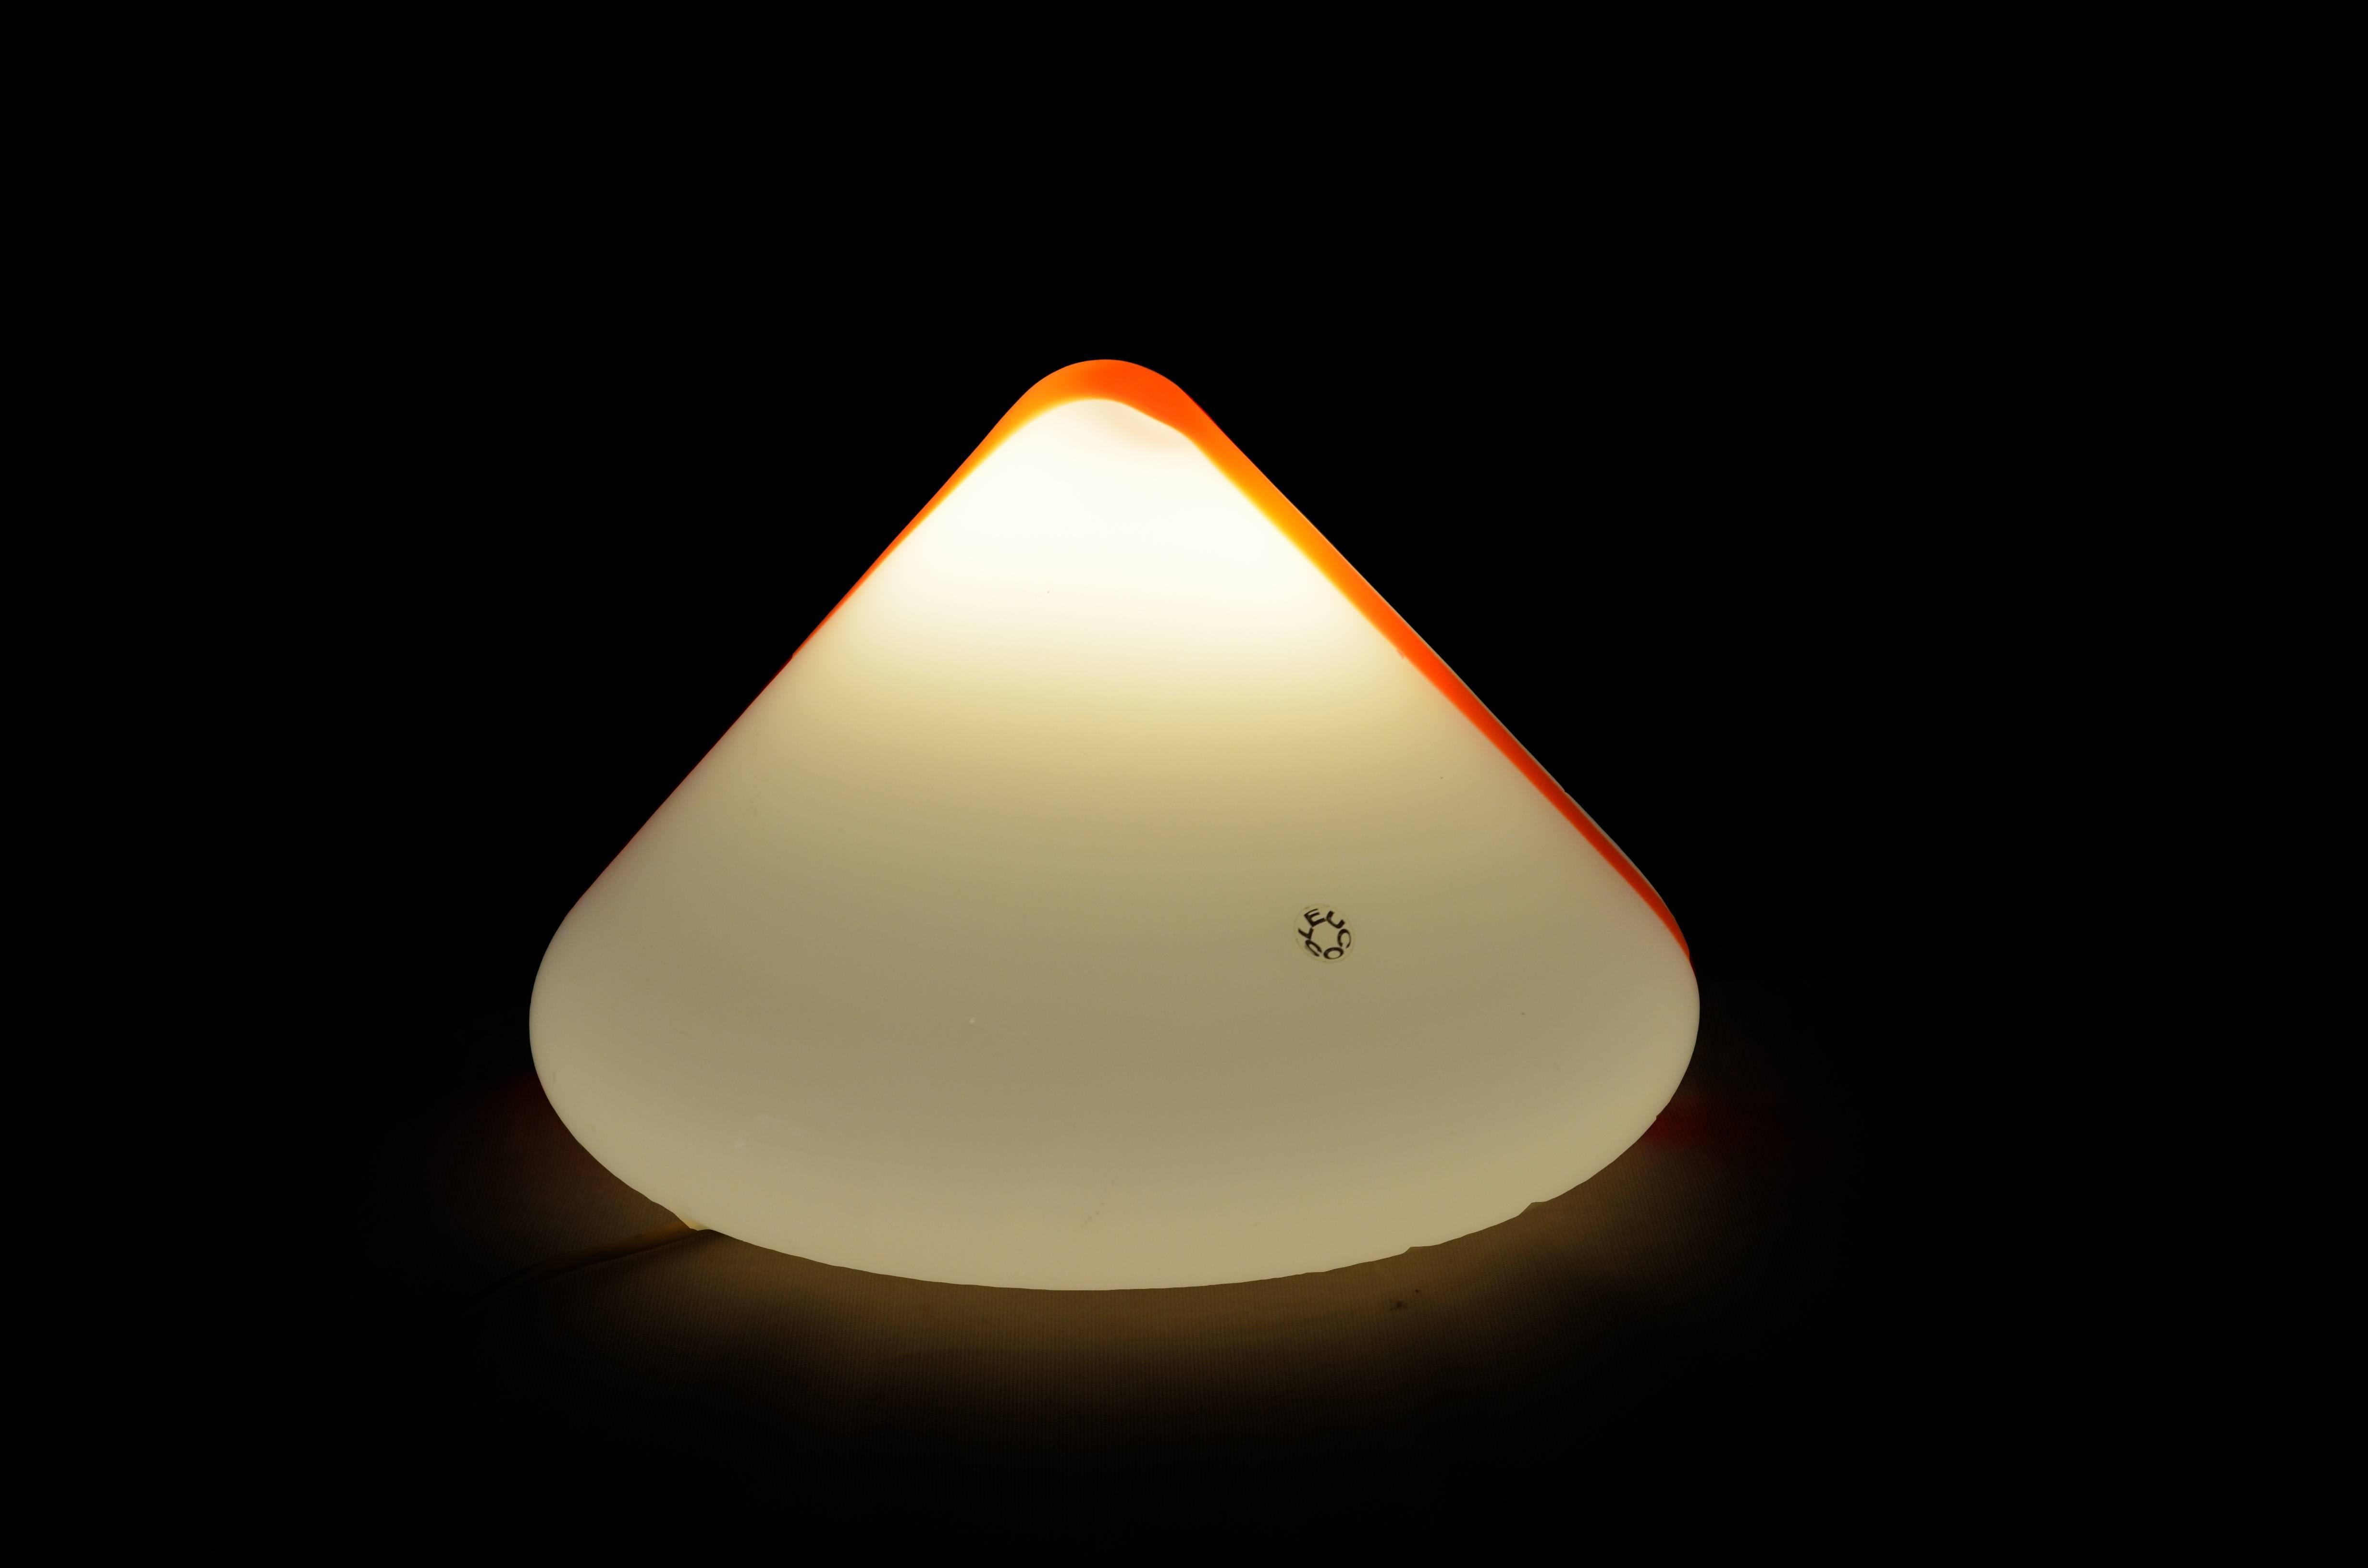 Leucos pyramidal white and orange blown glass table or floor lamp, 1970s

This pyramidal shape, white and orange blown glass lamp is marked Leucos. It is Italian from 1970s. The lamp is in perfect condition, it comes with its original wiring and